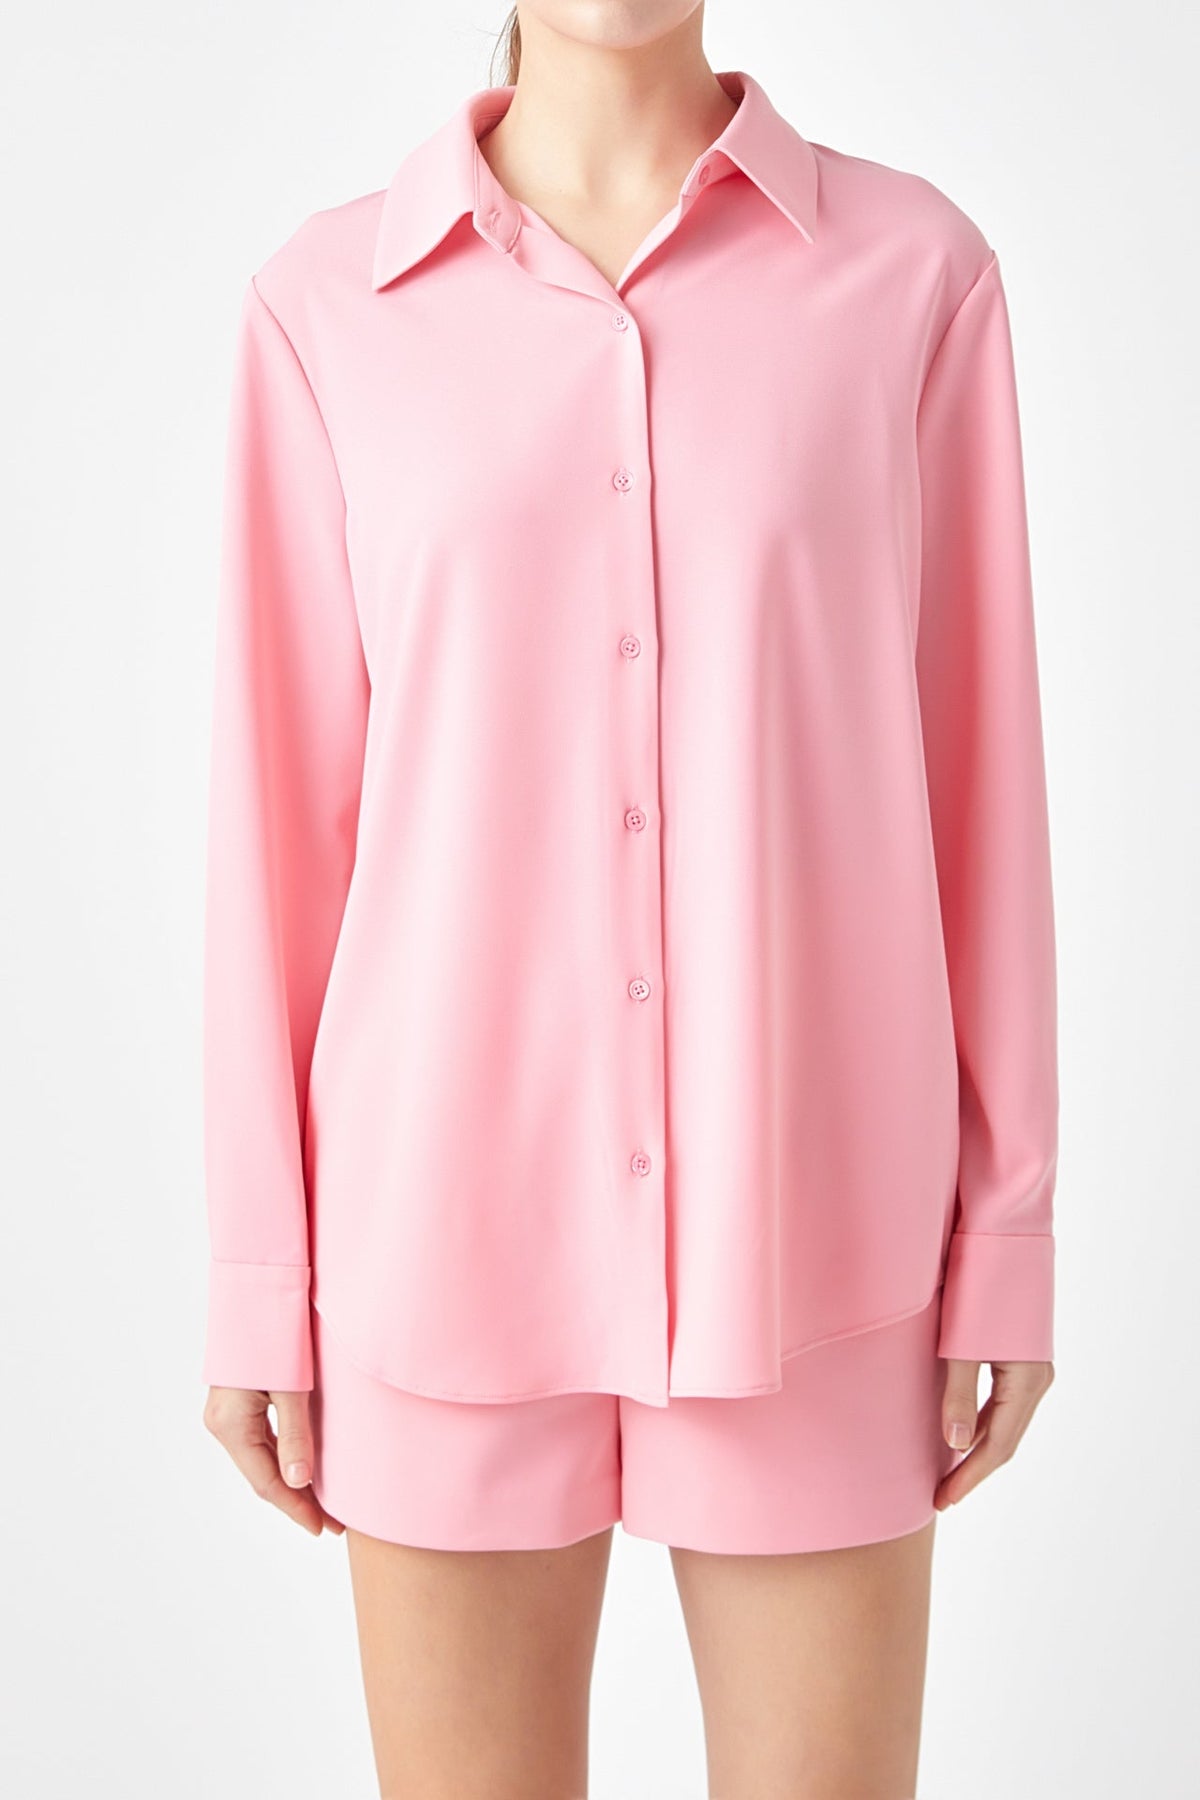 ENDLESS ROSE - Shirt Blouse - SHIRTS & BLOUSES available at Objectrare